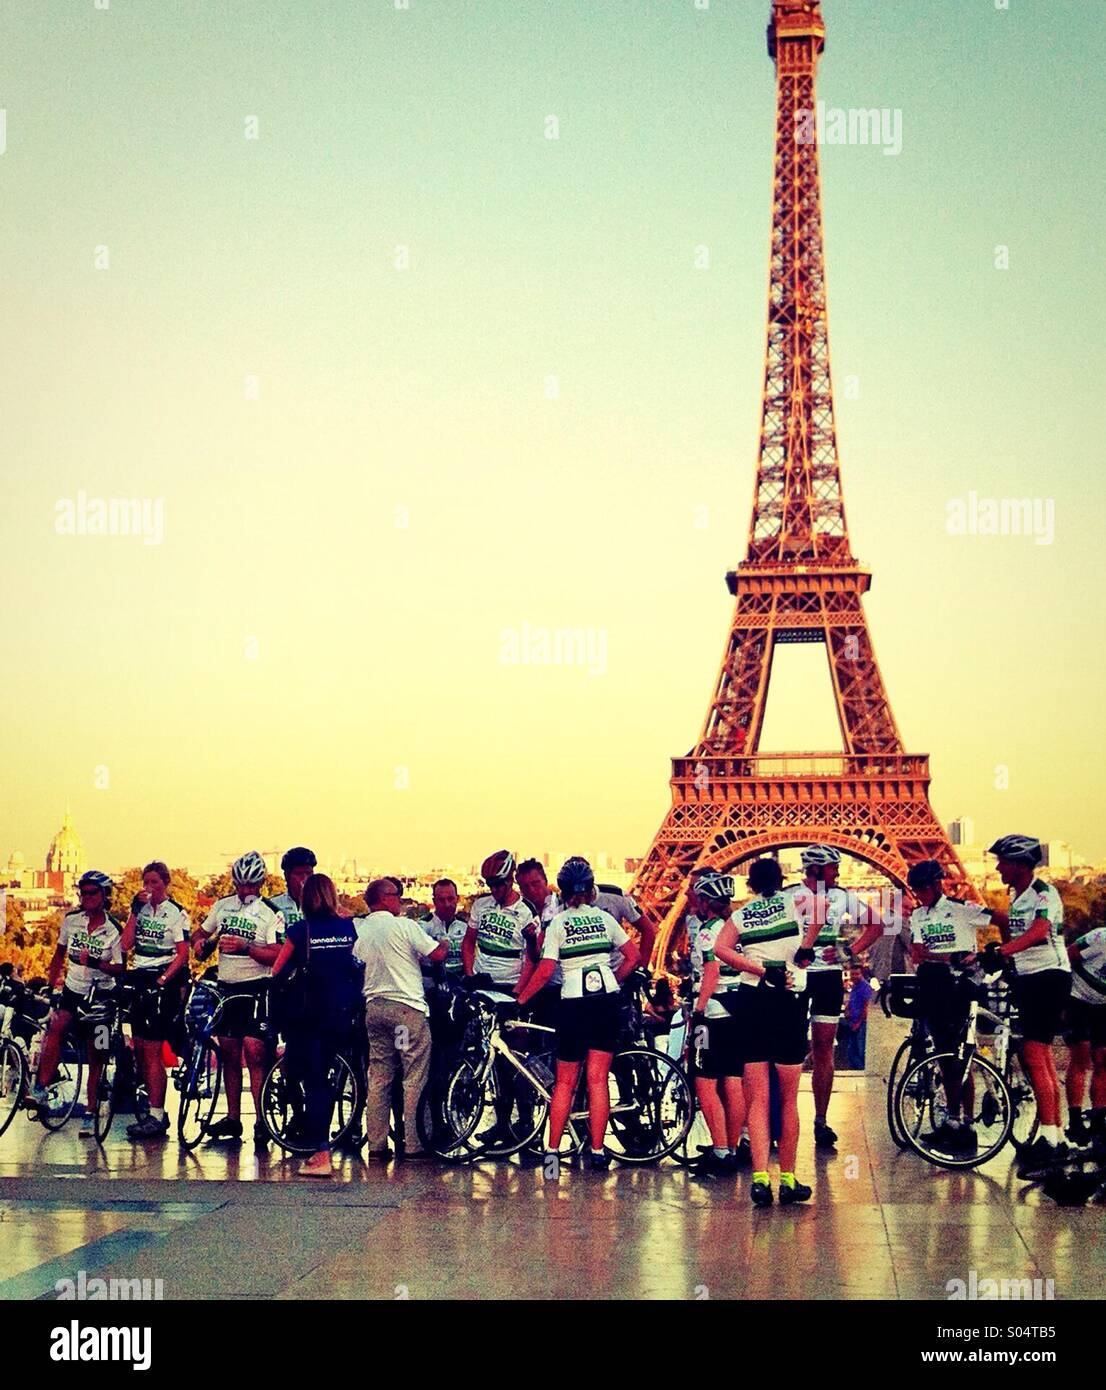 Bicyclers contemplating the Eiffel tower, France Stock Photo